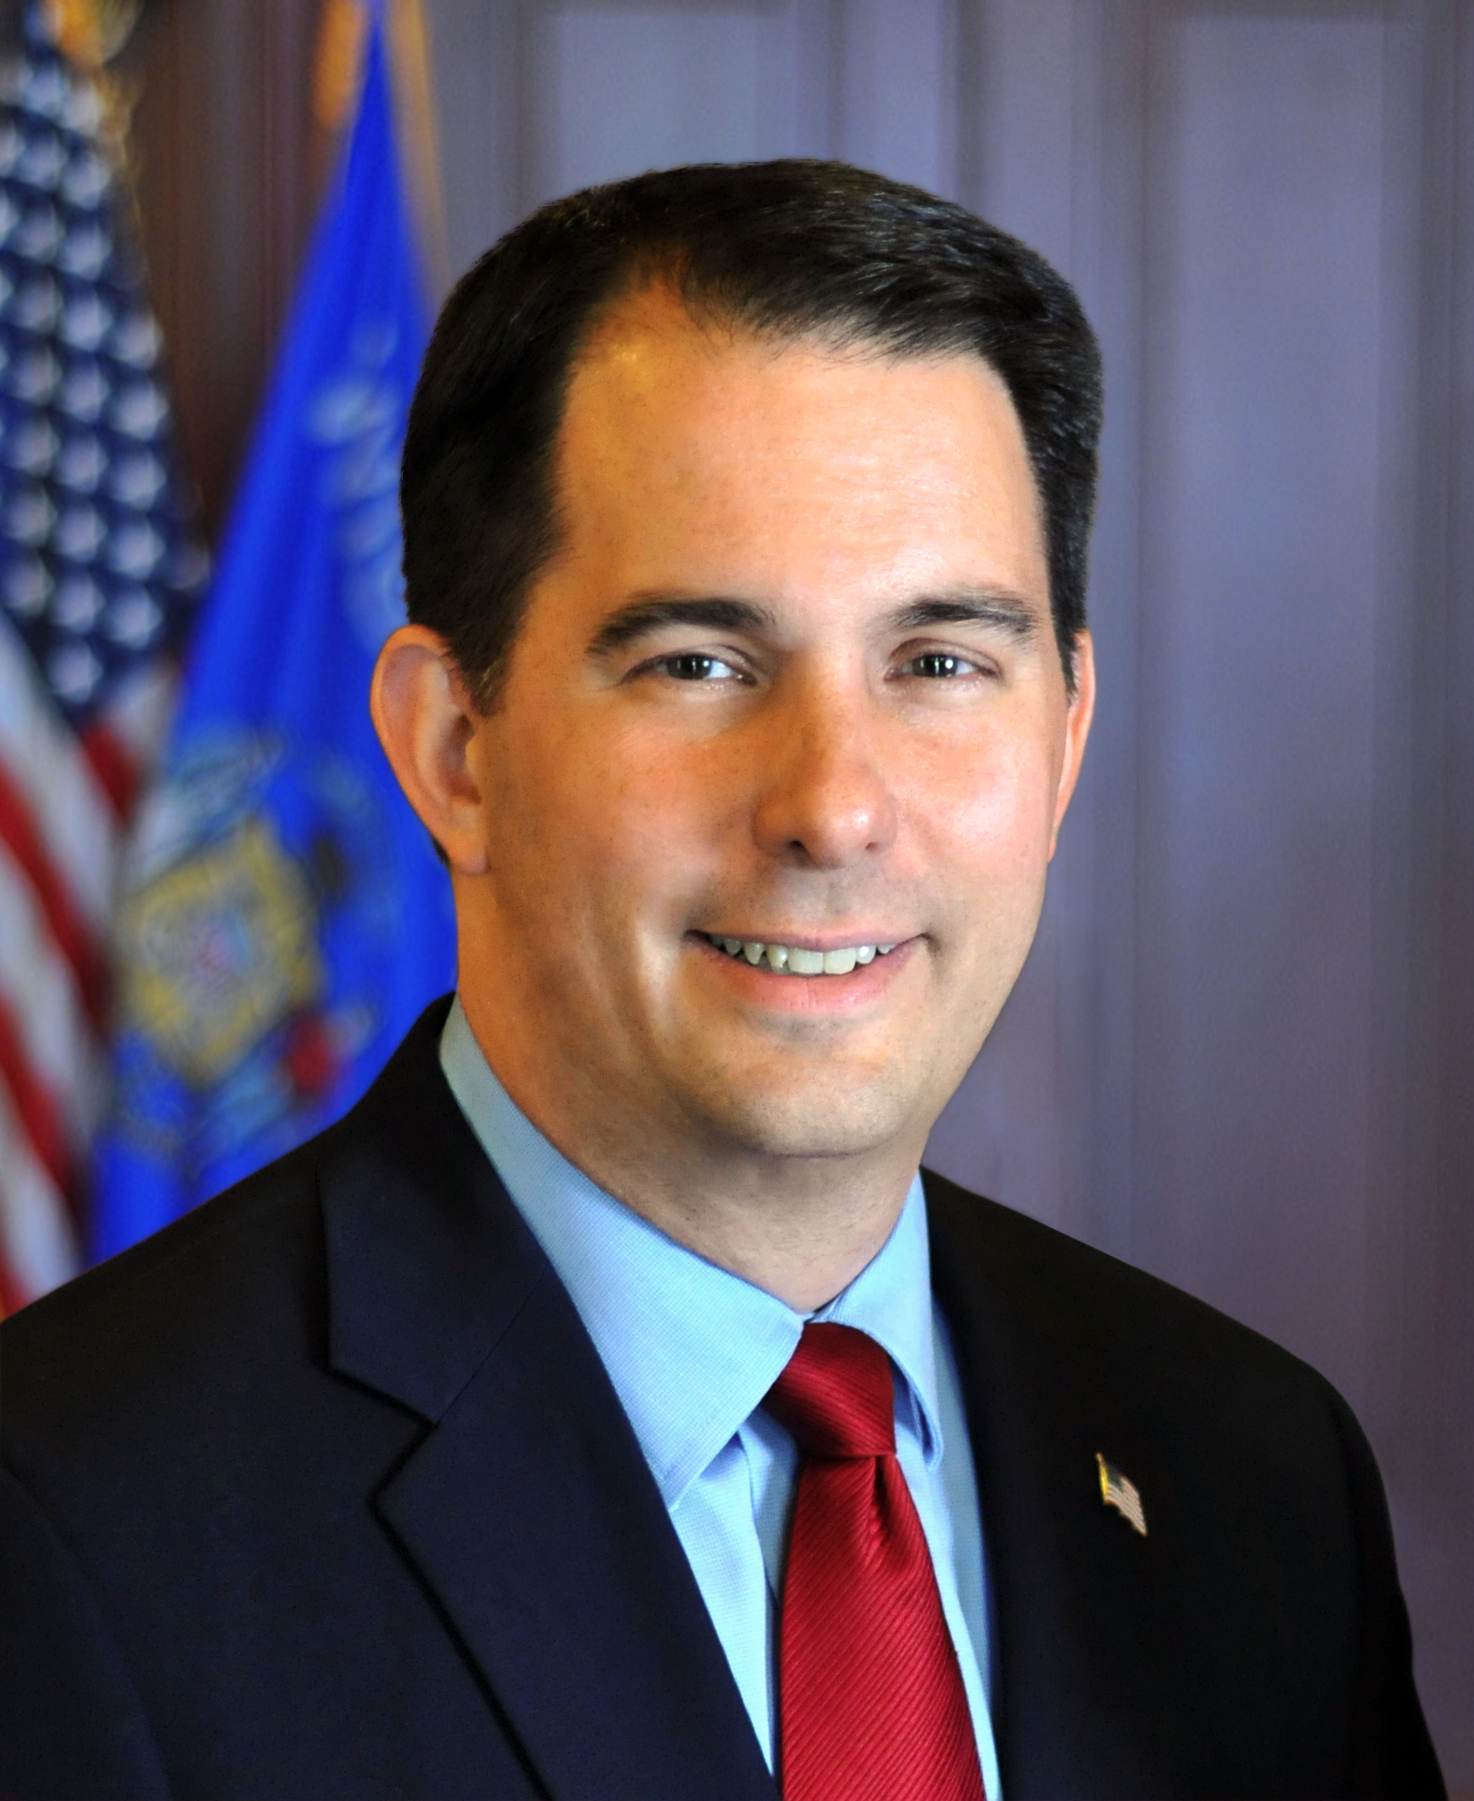 Governor Walker Signs Bills to Create and Expand Outdoor Recreation, Attract Talent to Wisconsin, and Improve Medical Assistance